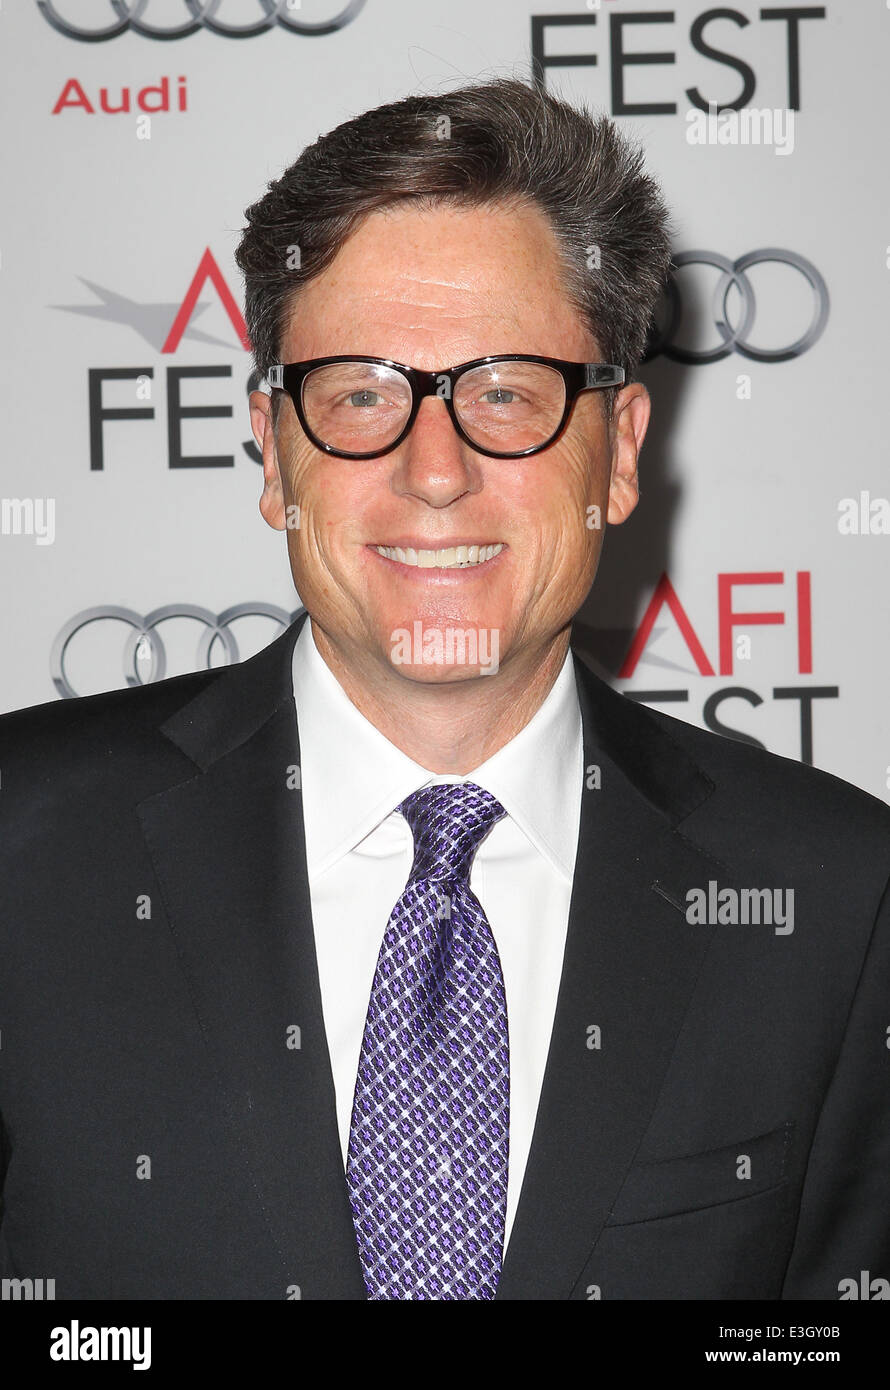 AFI FEST 2013 Presented By Audi - The Secret Life Of Walter Mitty Premiere At TCL Chinese Theatre  Featuring: John Goldwyn Where: Hollywood, California, United States When: 13 Nov 2013 Stock Photo